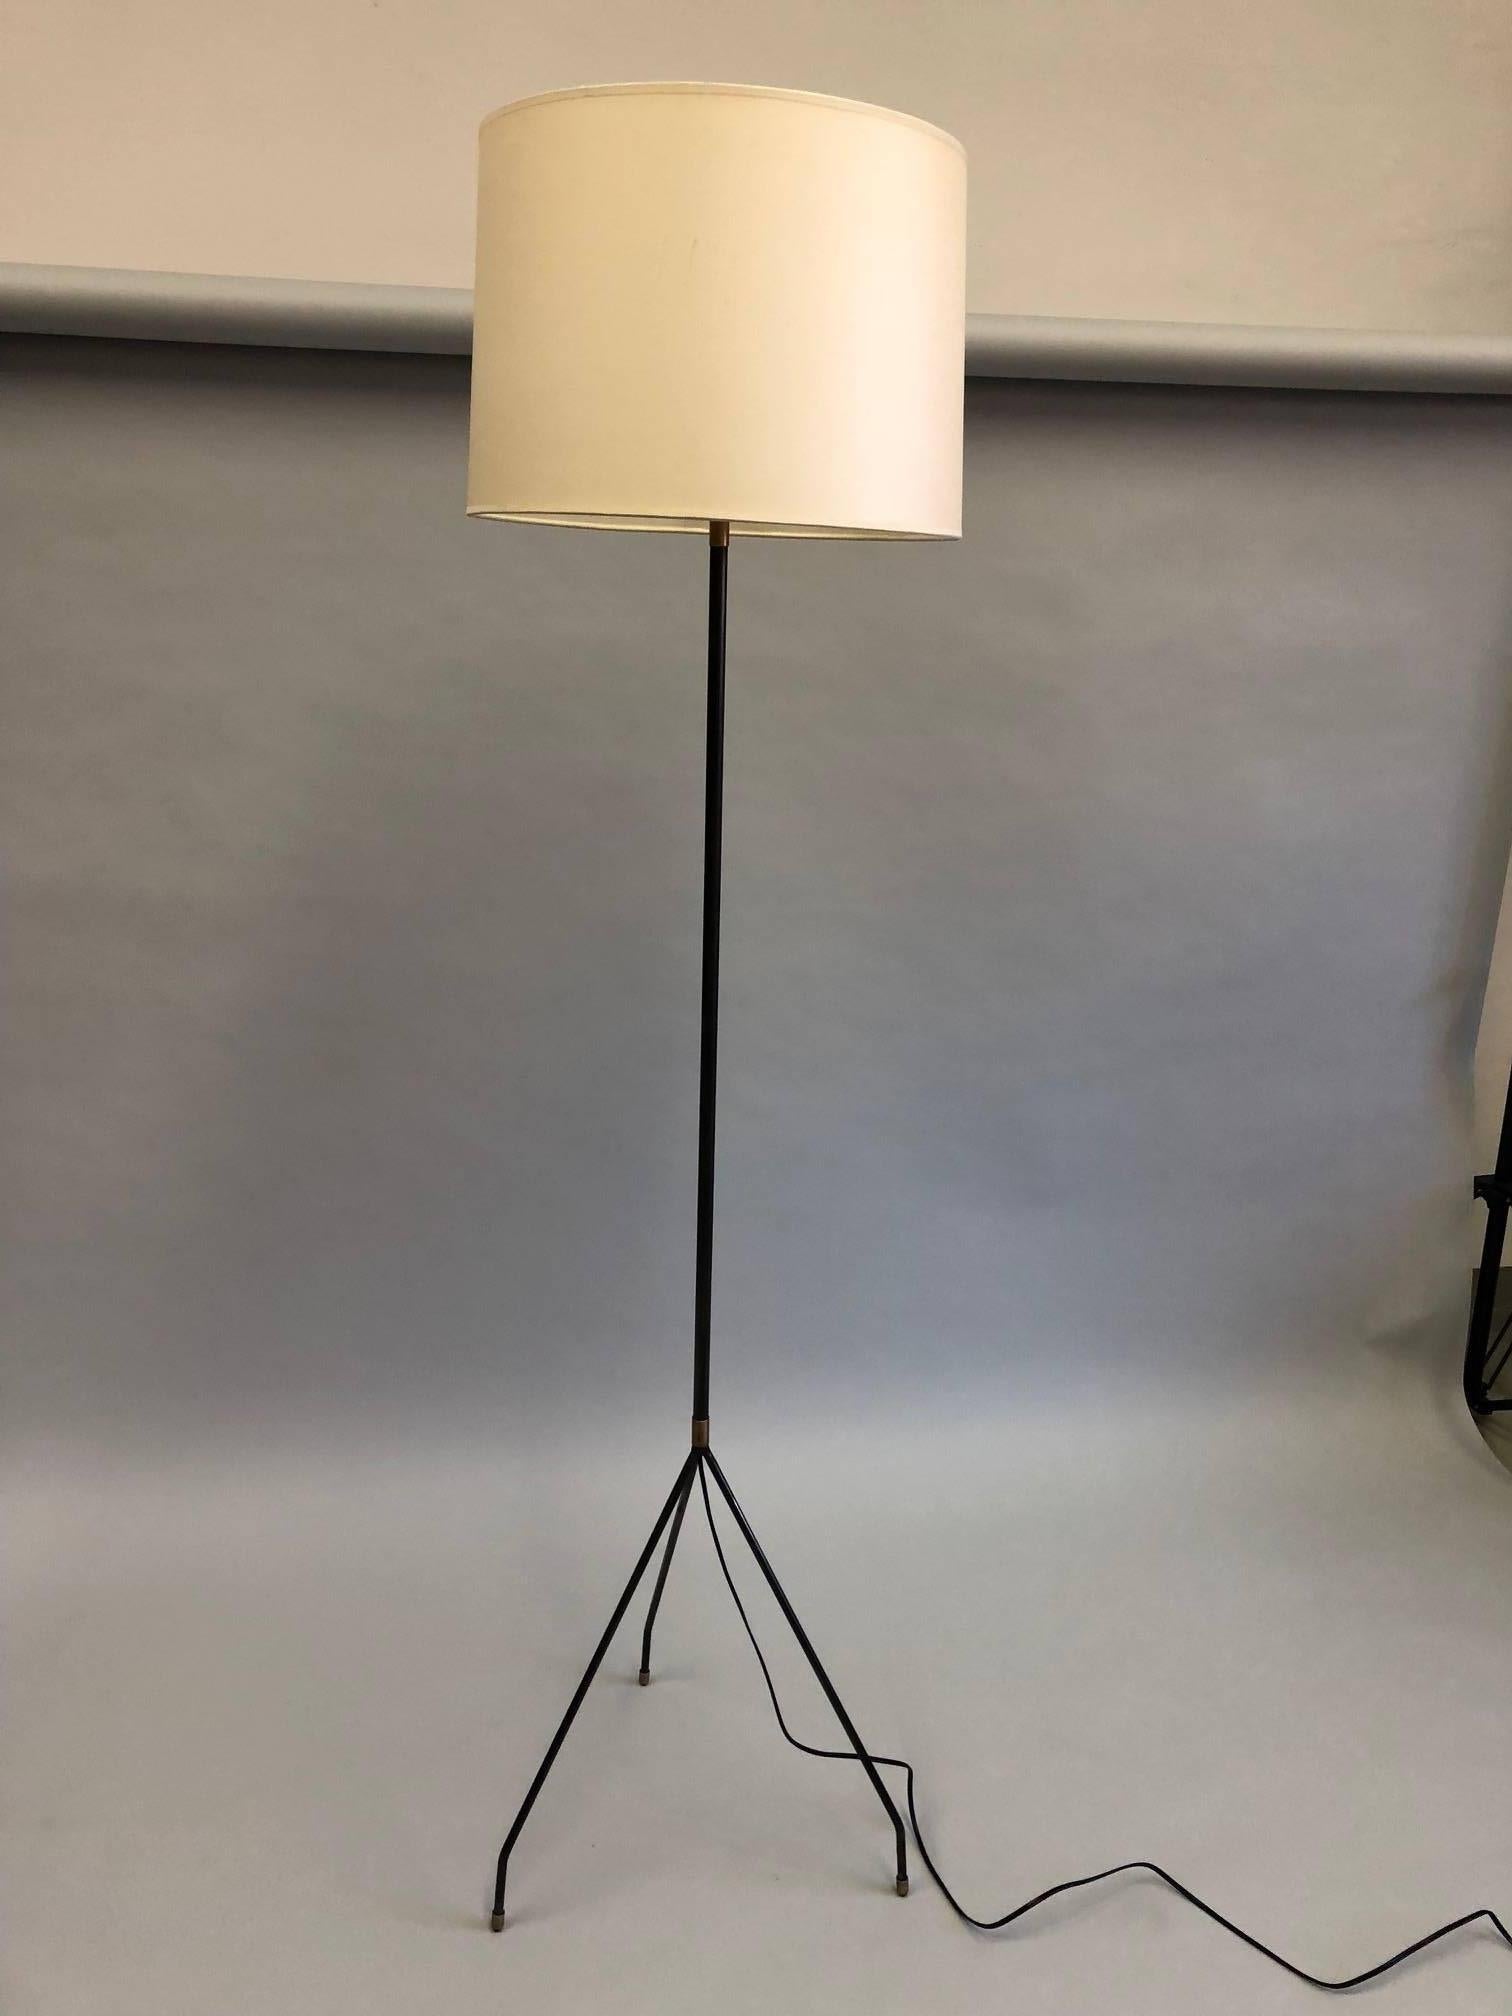 Patinated Pair of French Mid-Century Modern / Minimalist Iron Floor Lamps, Pierre Guariche For Sale